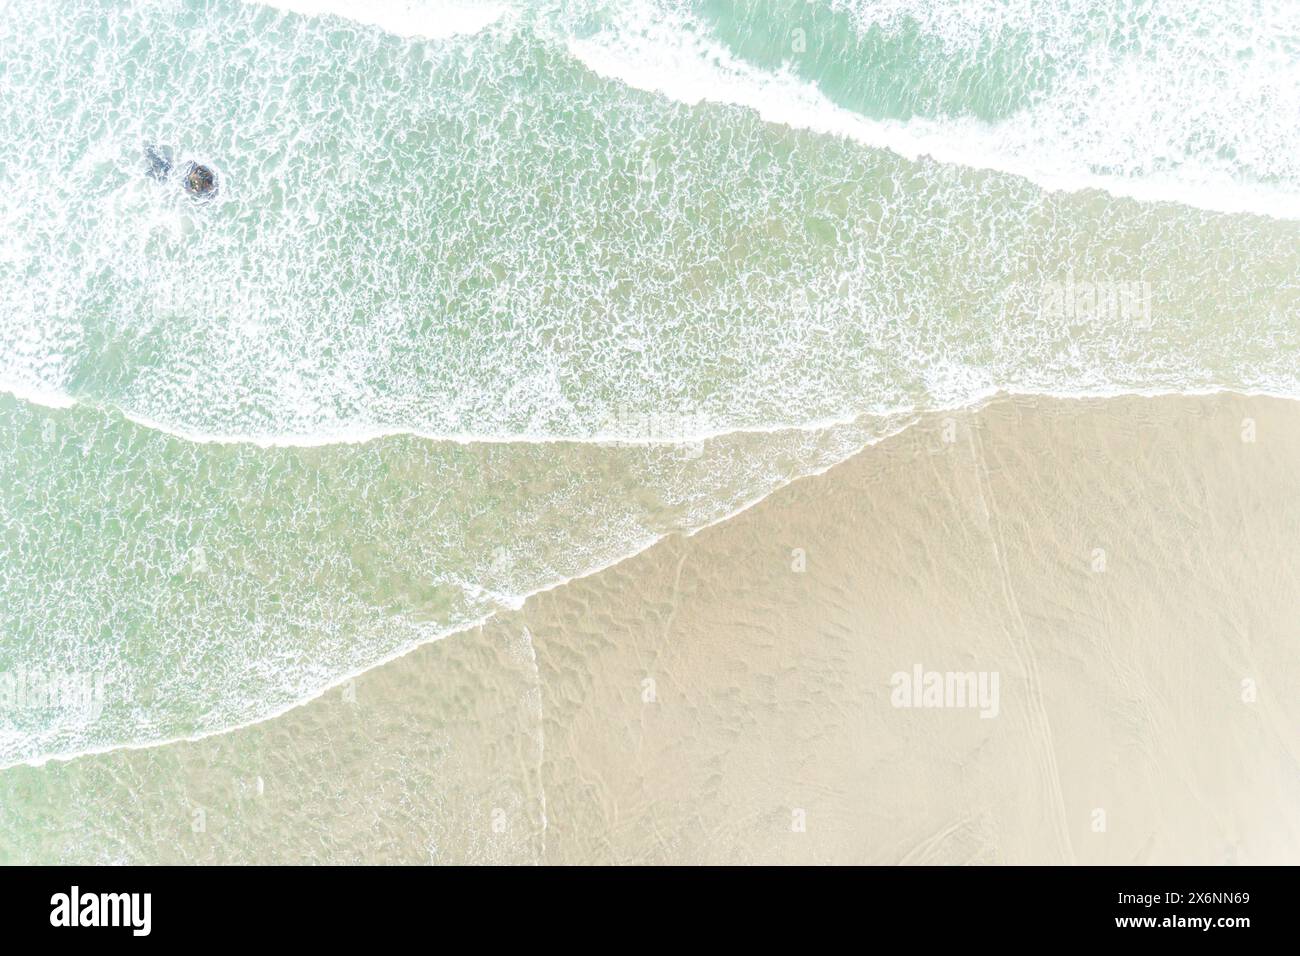 drone aerial overhead view of the foamy waves in a beach at low tide. Summer image, holidays concept Stock Photo